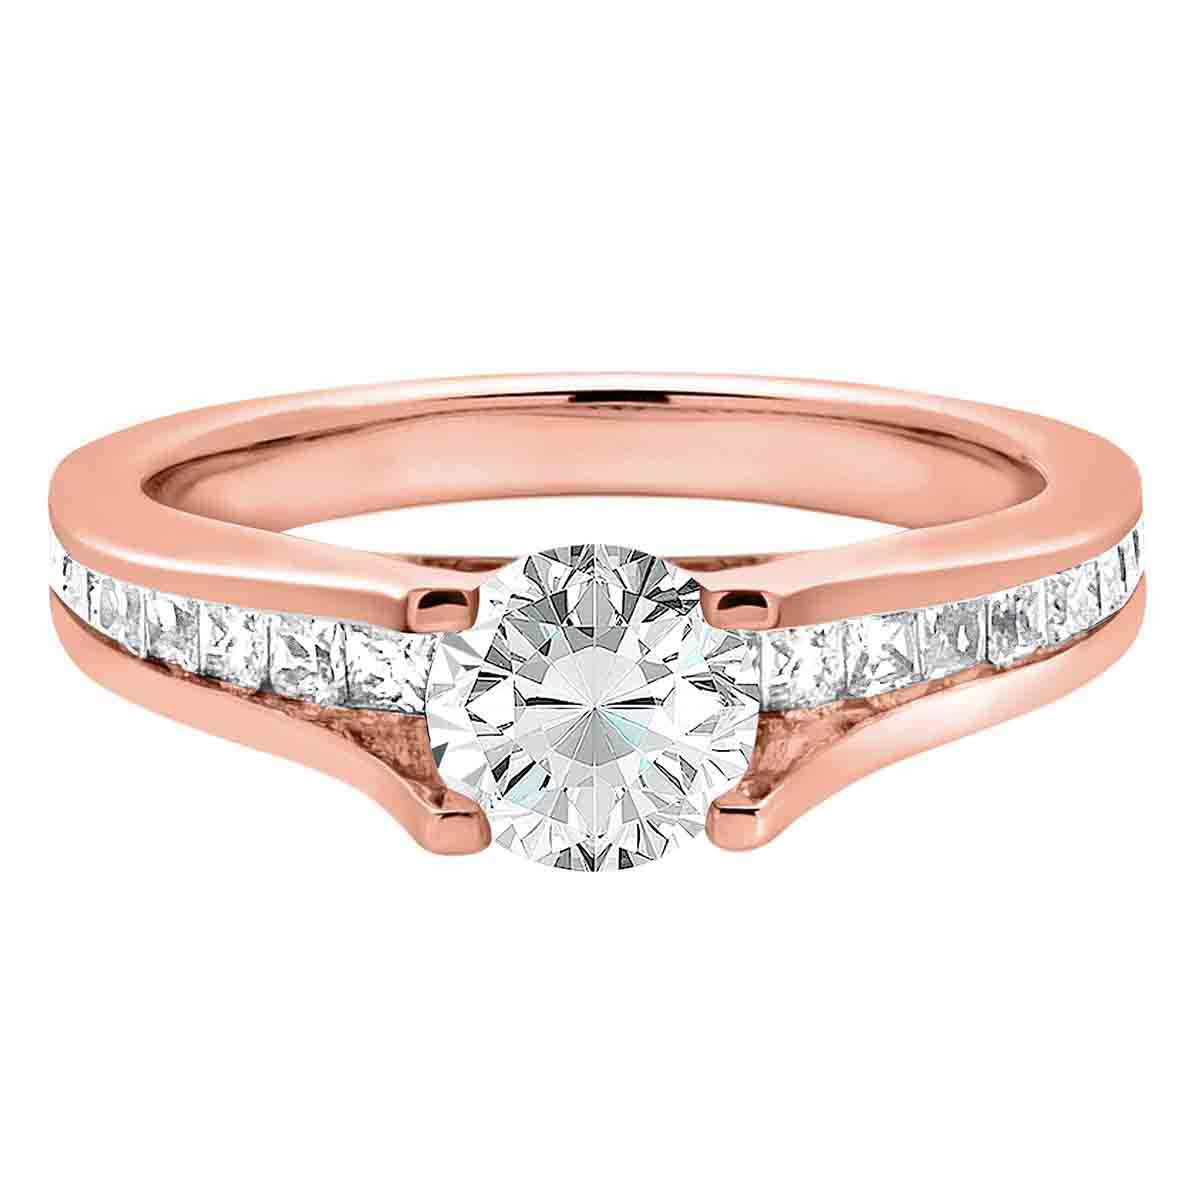 Channel Set Diamond Ring set in rose gold